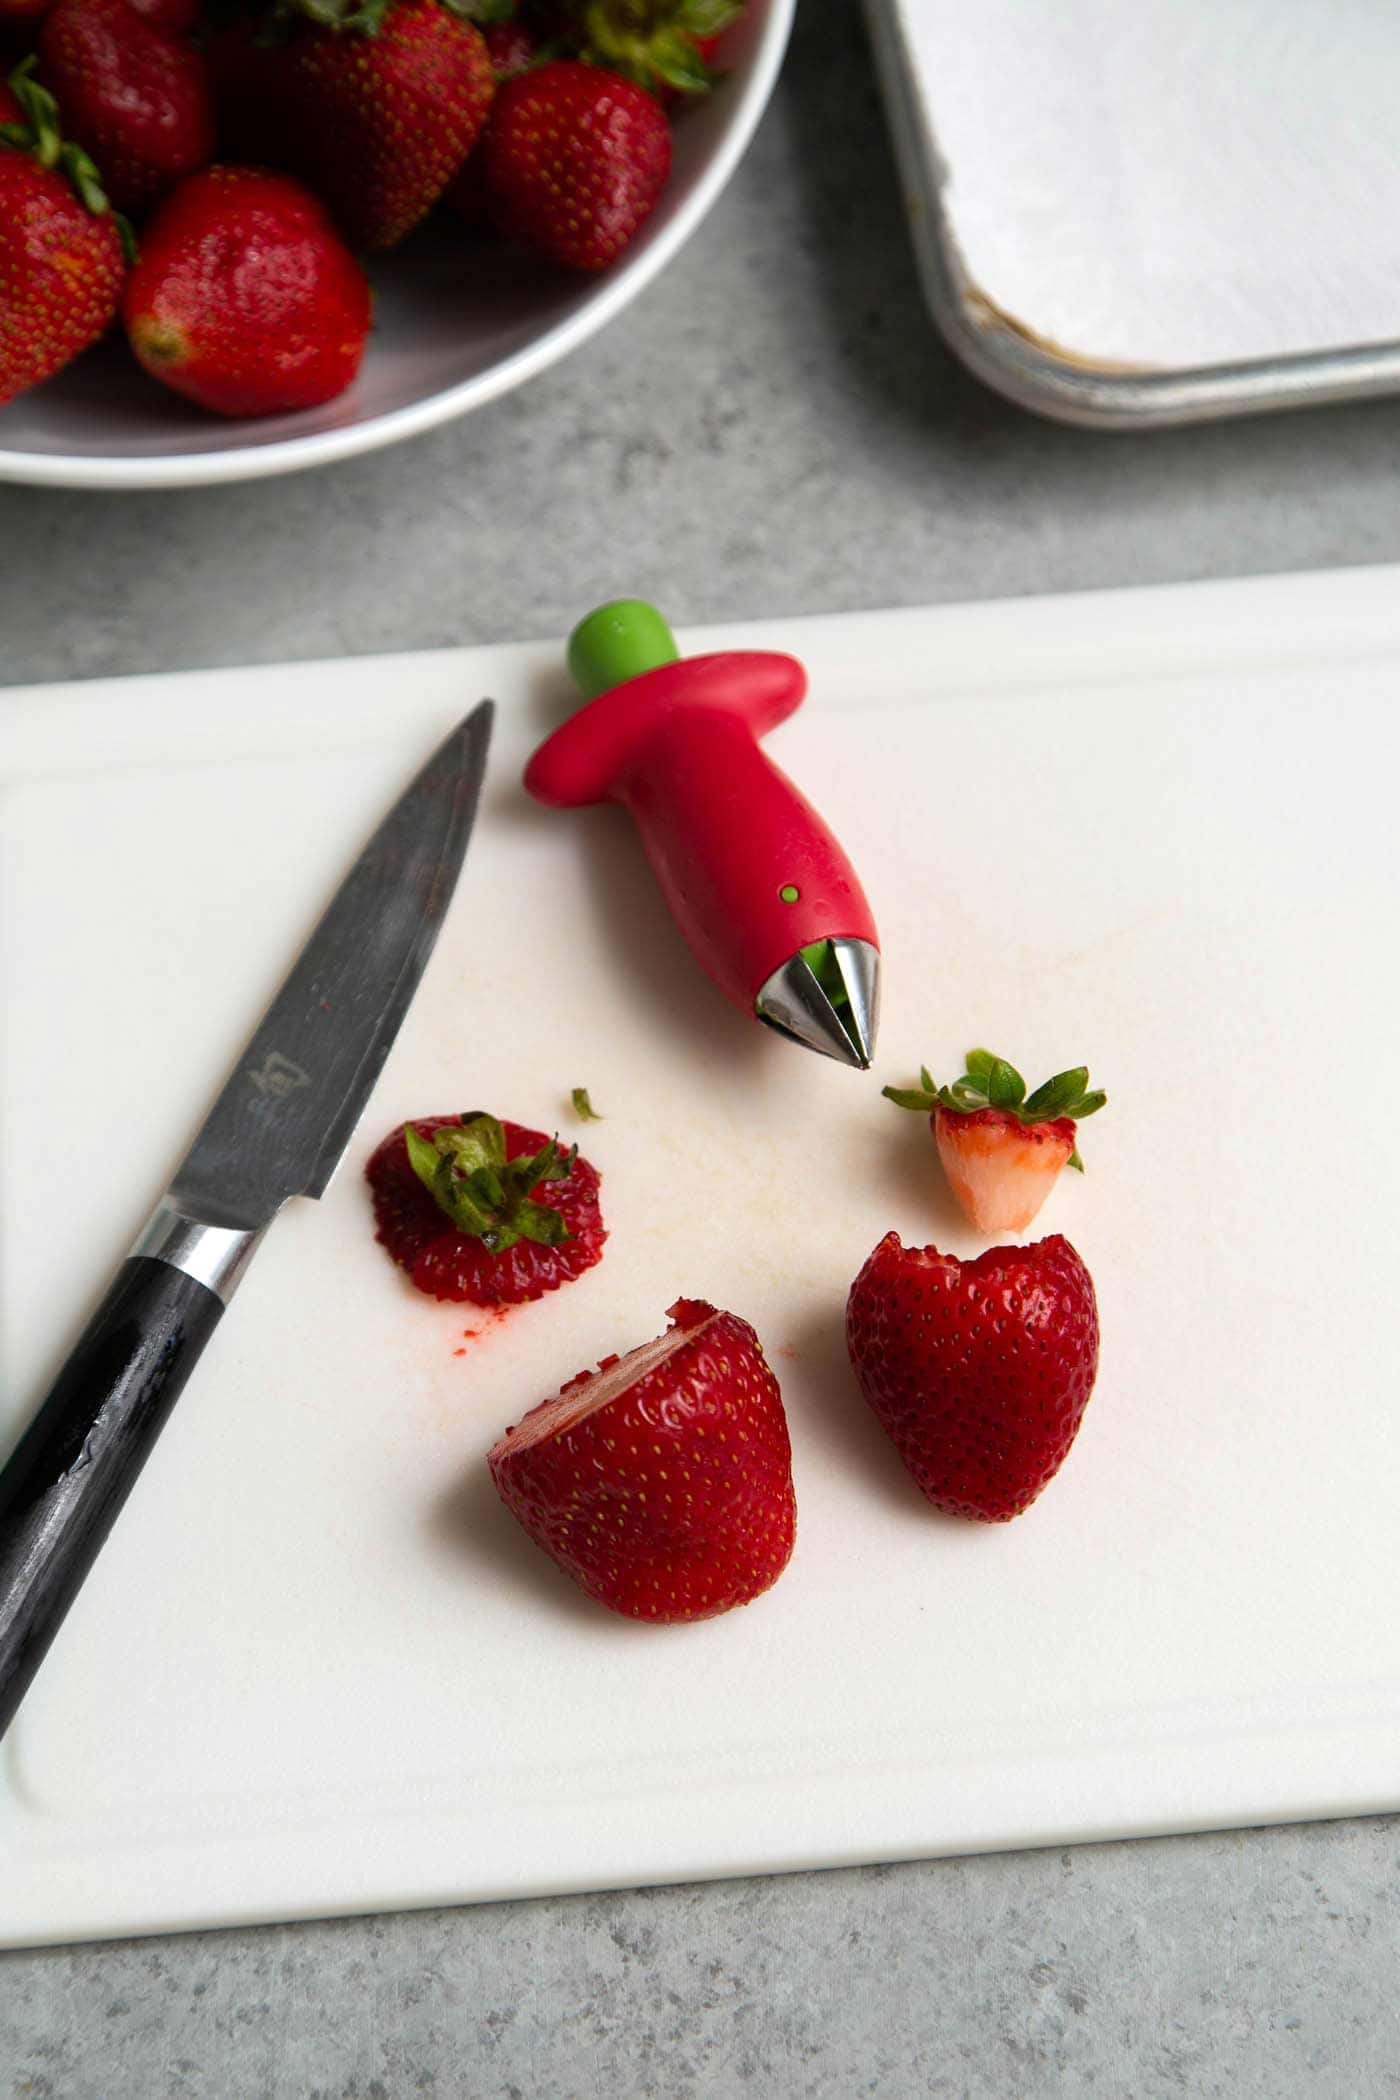 Use a strawberry huller or pairing knife to prepare strawberries for freezing